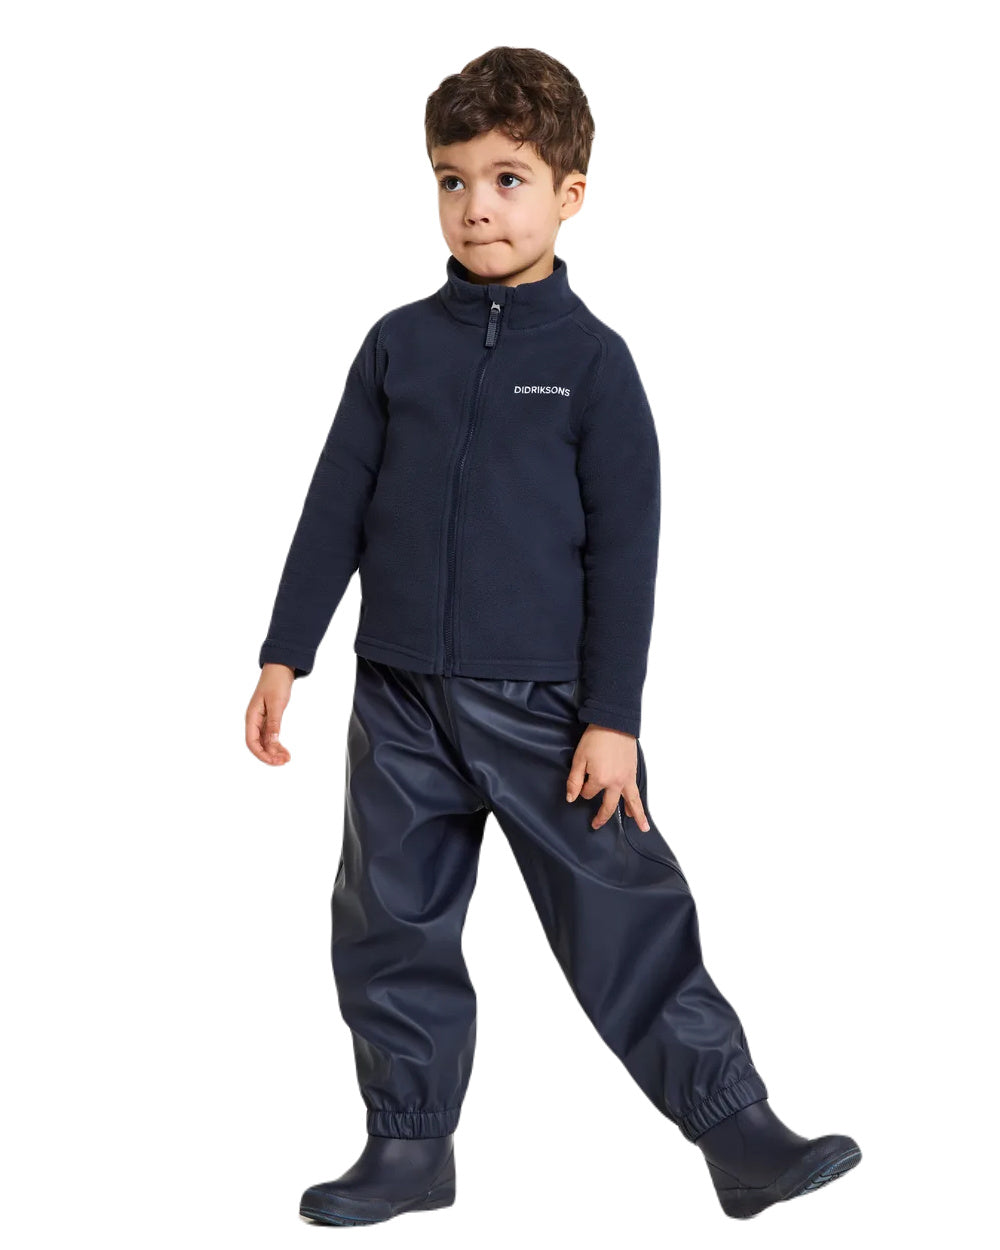 Navy Coloured Didriksons Midjeman Childrens Pants Galon On A White Background 